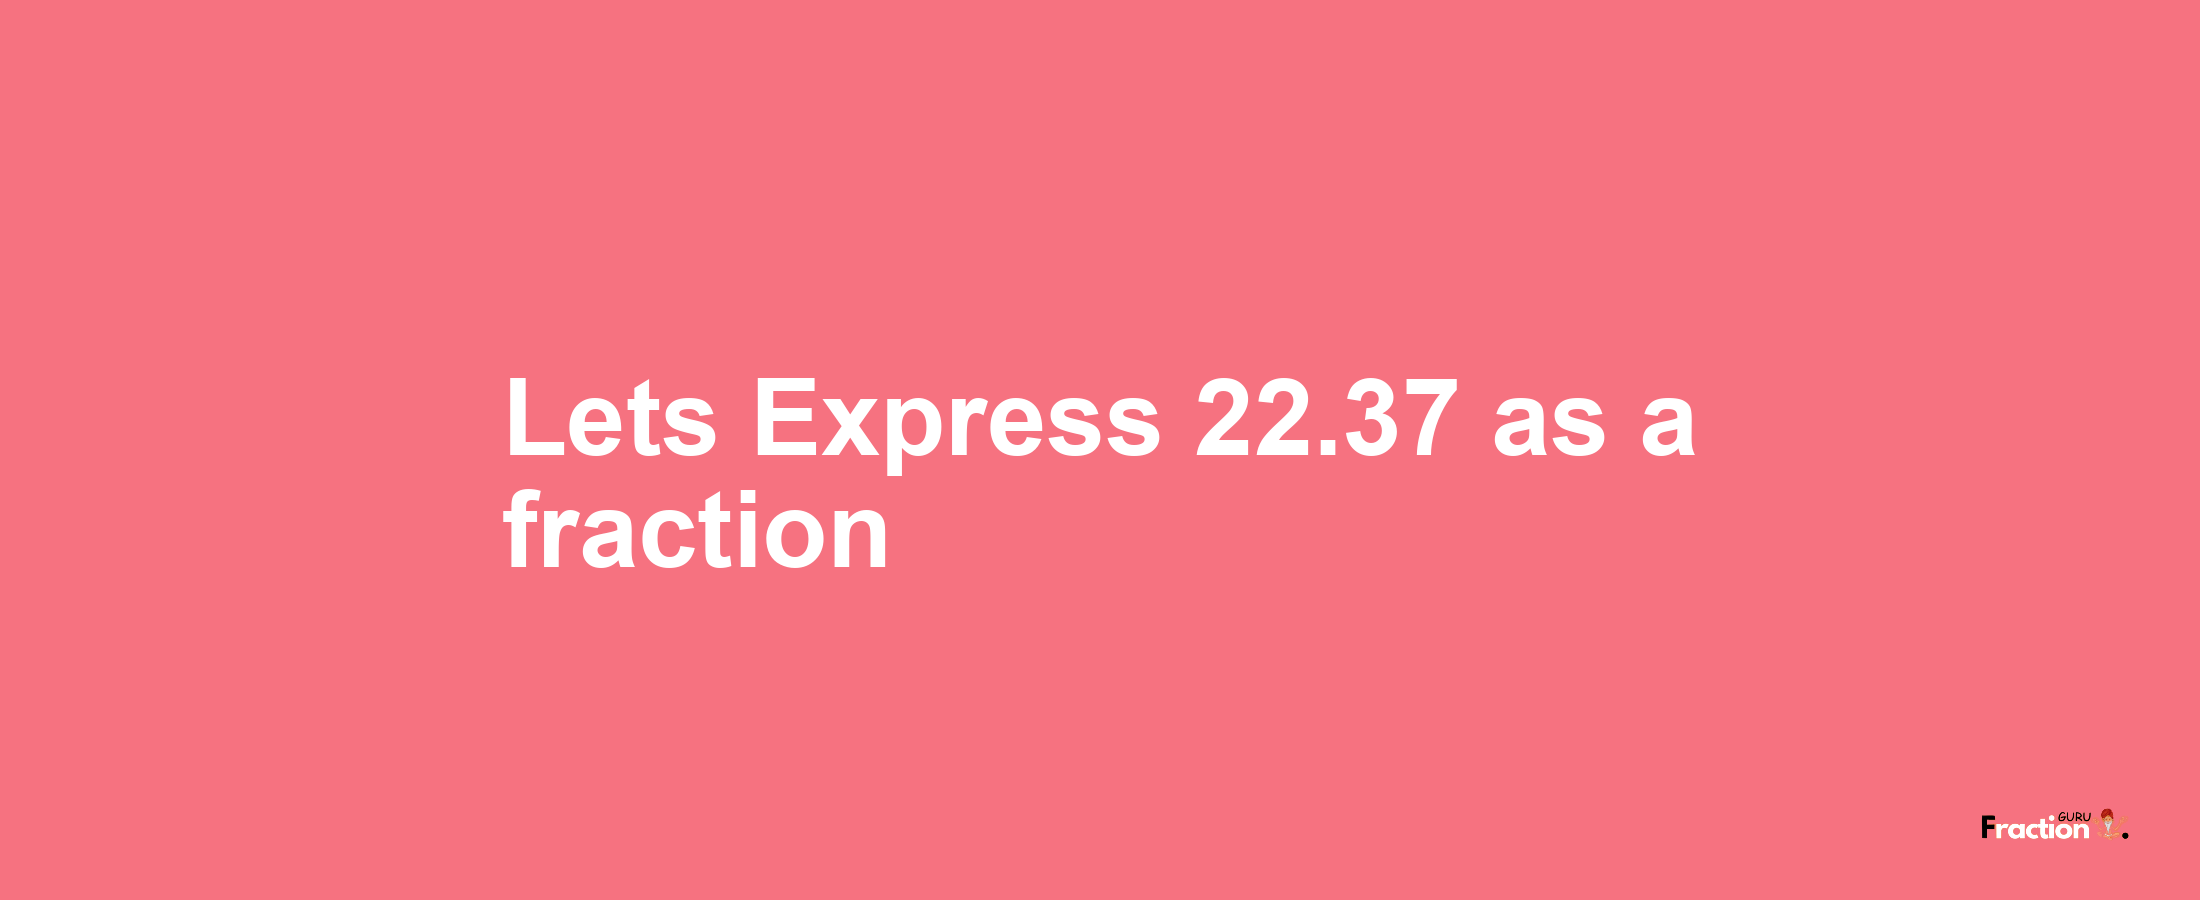 Lets Express 22.37 as afraction